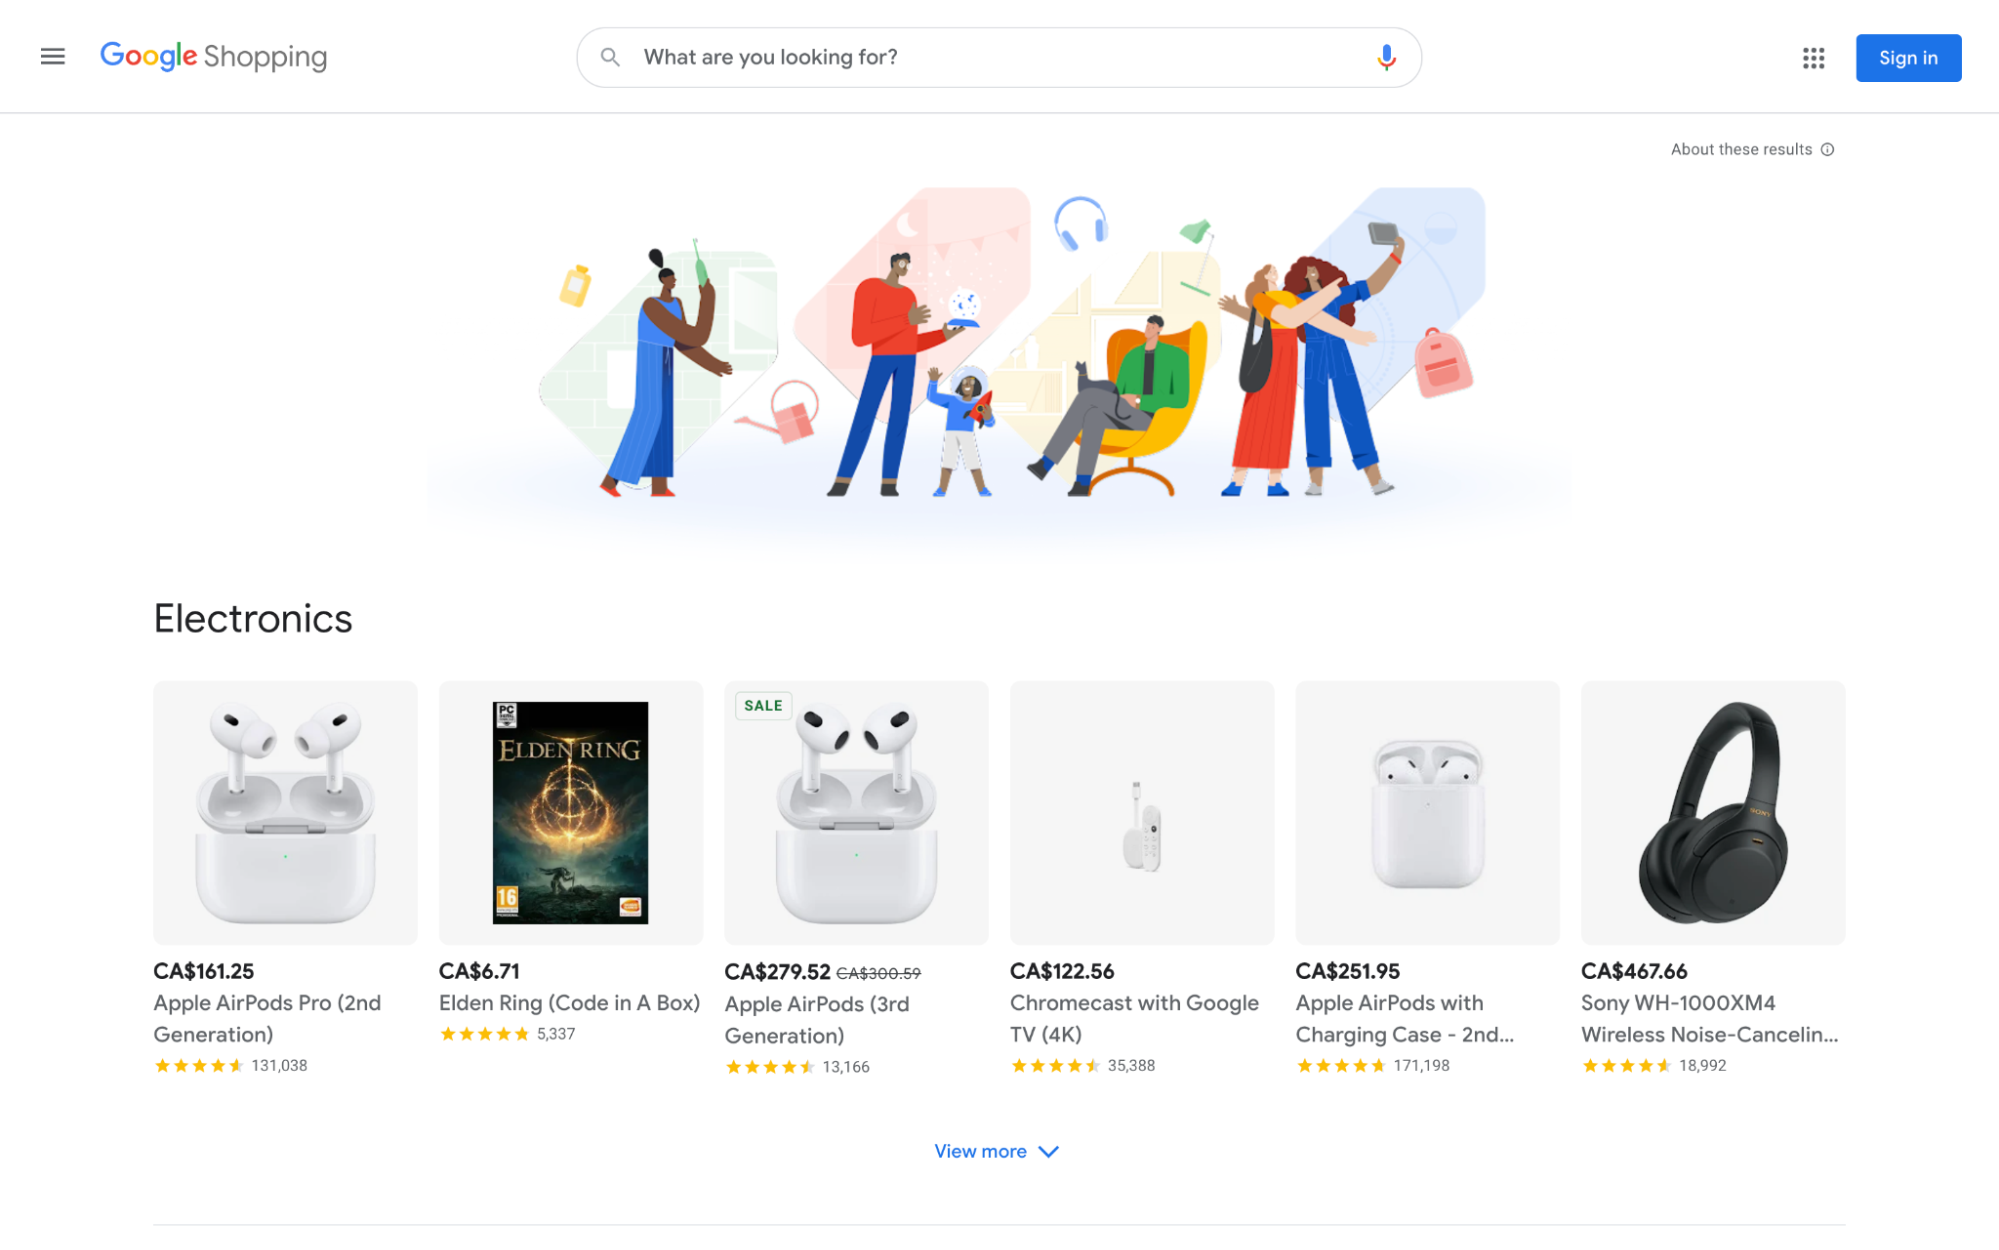 Product listings (headphones and video games) below an illustration of shoppers and a Google search bar.